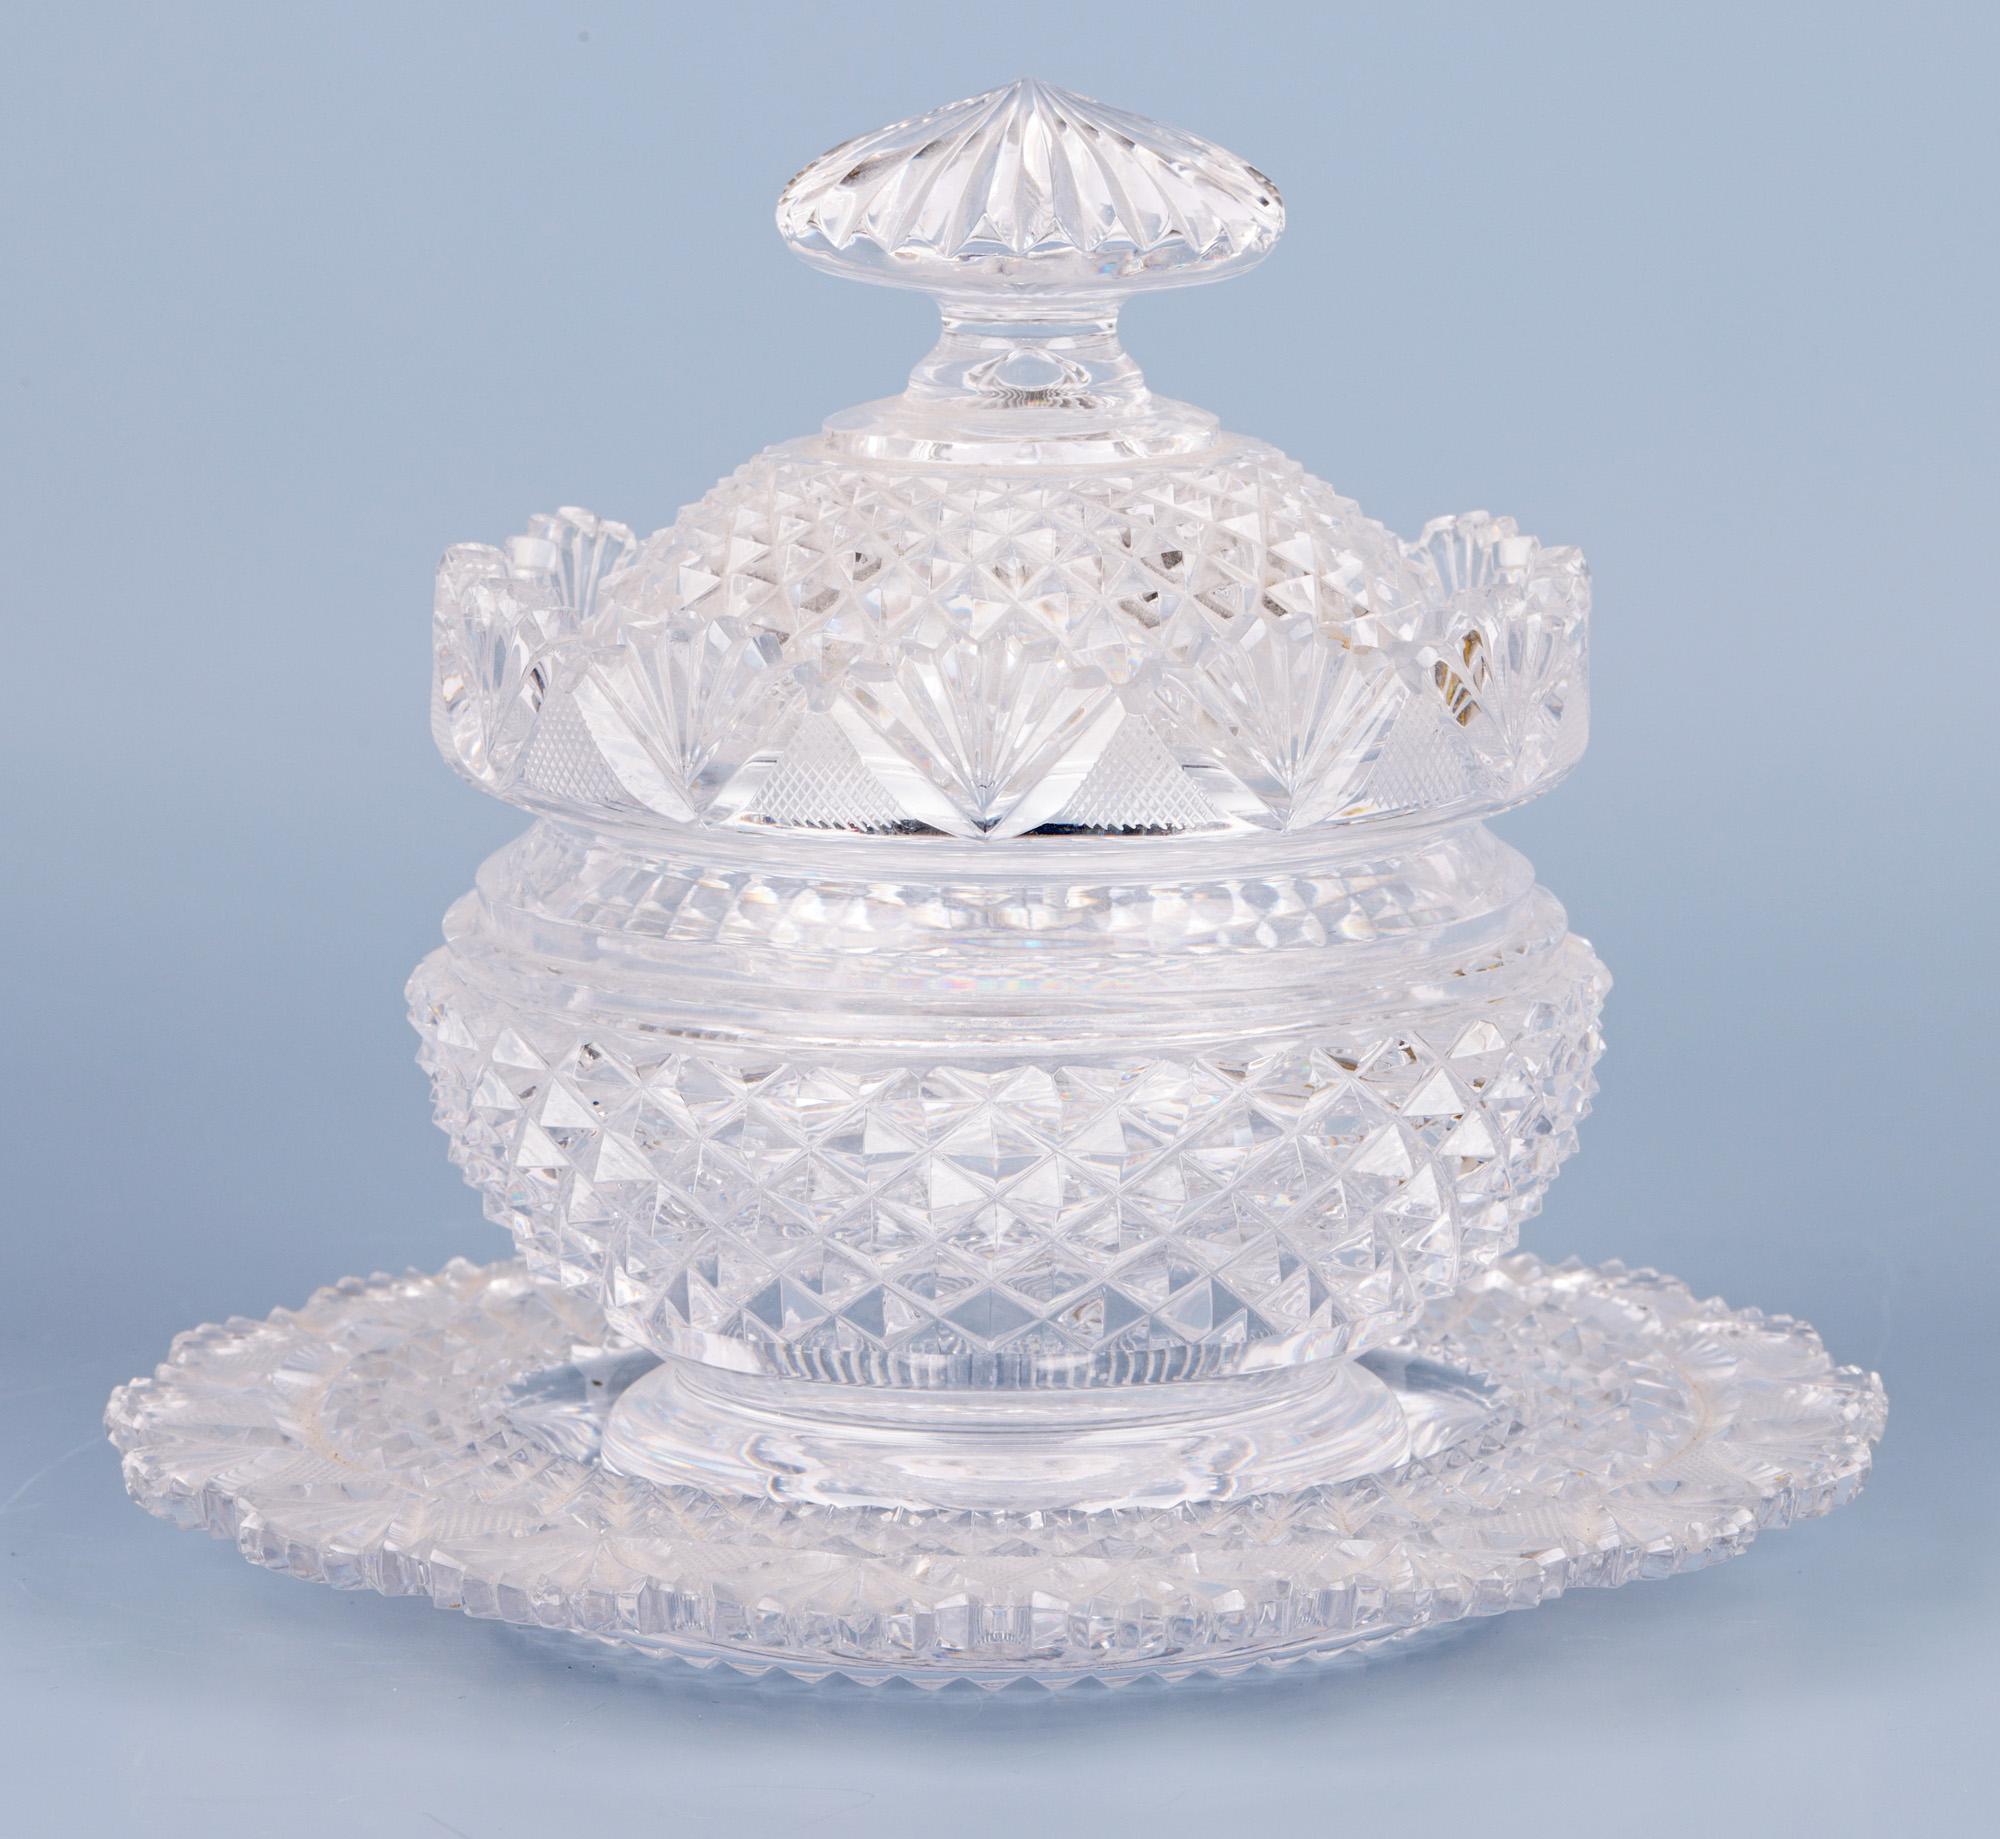 A very fine pair matching antique cut glass lidded butter dishes on matching stands dating from around 1825. The dishes are of wide rounded shape with narrow round cut bases with polished pontil marks which sit within the recess of the stands. The